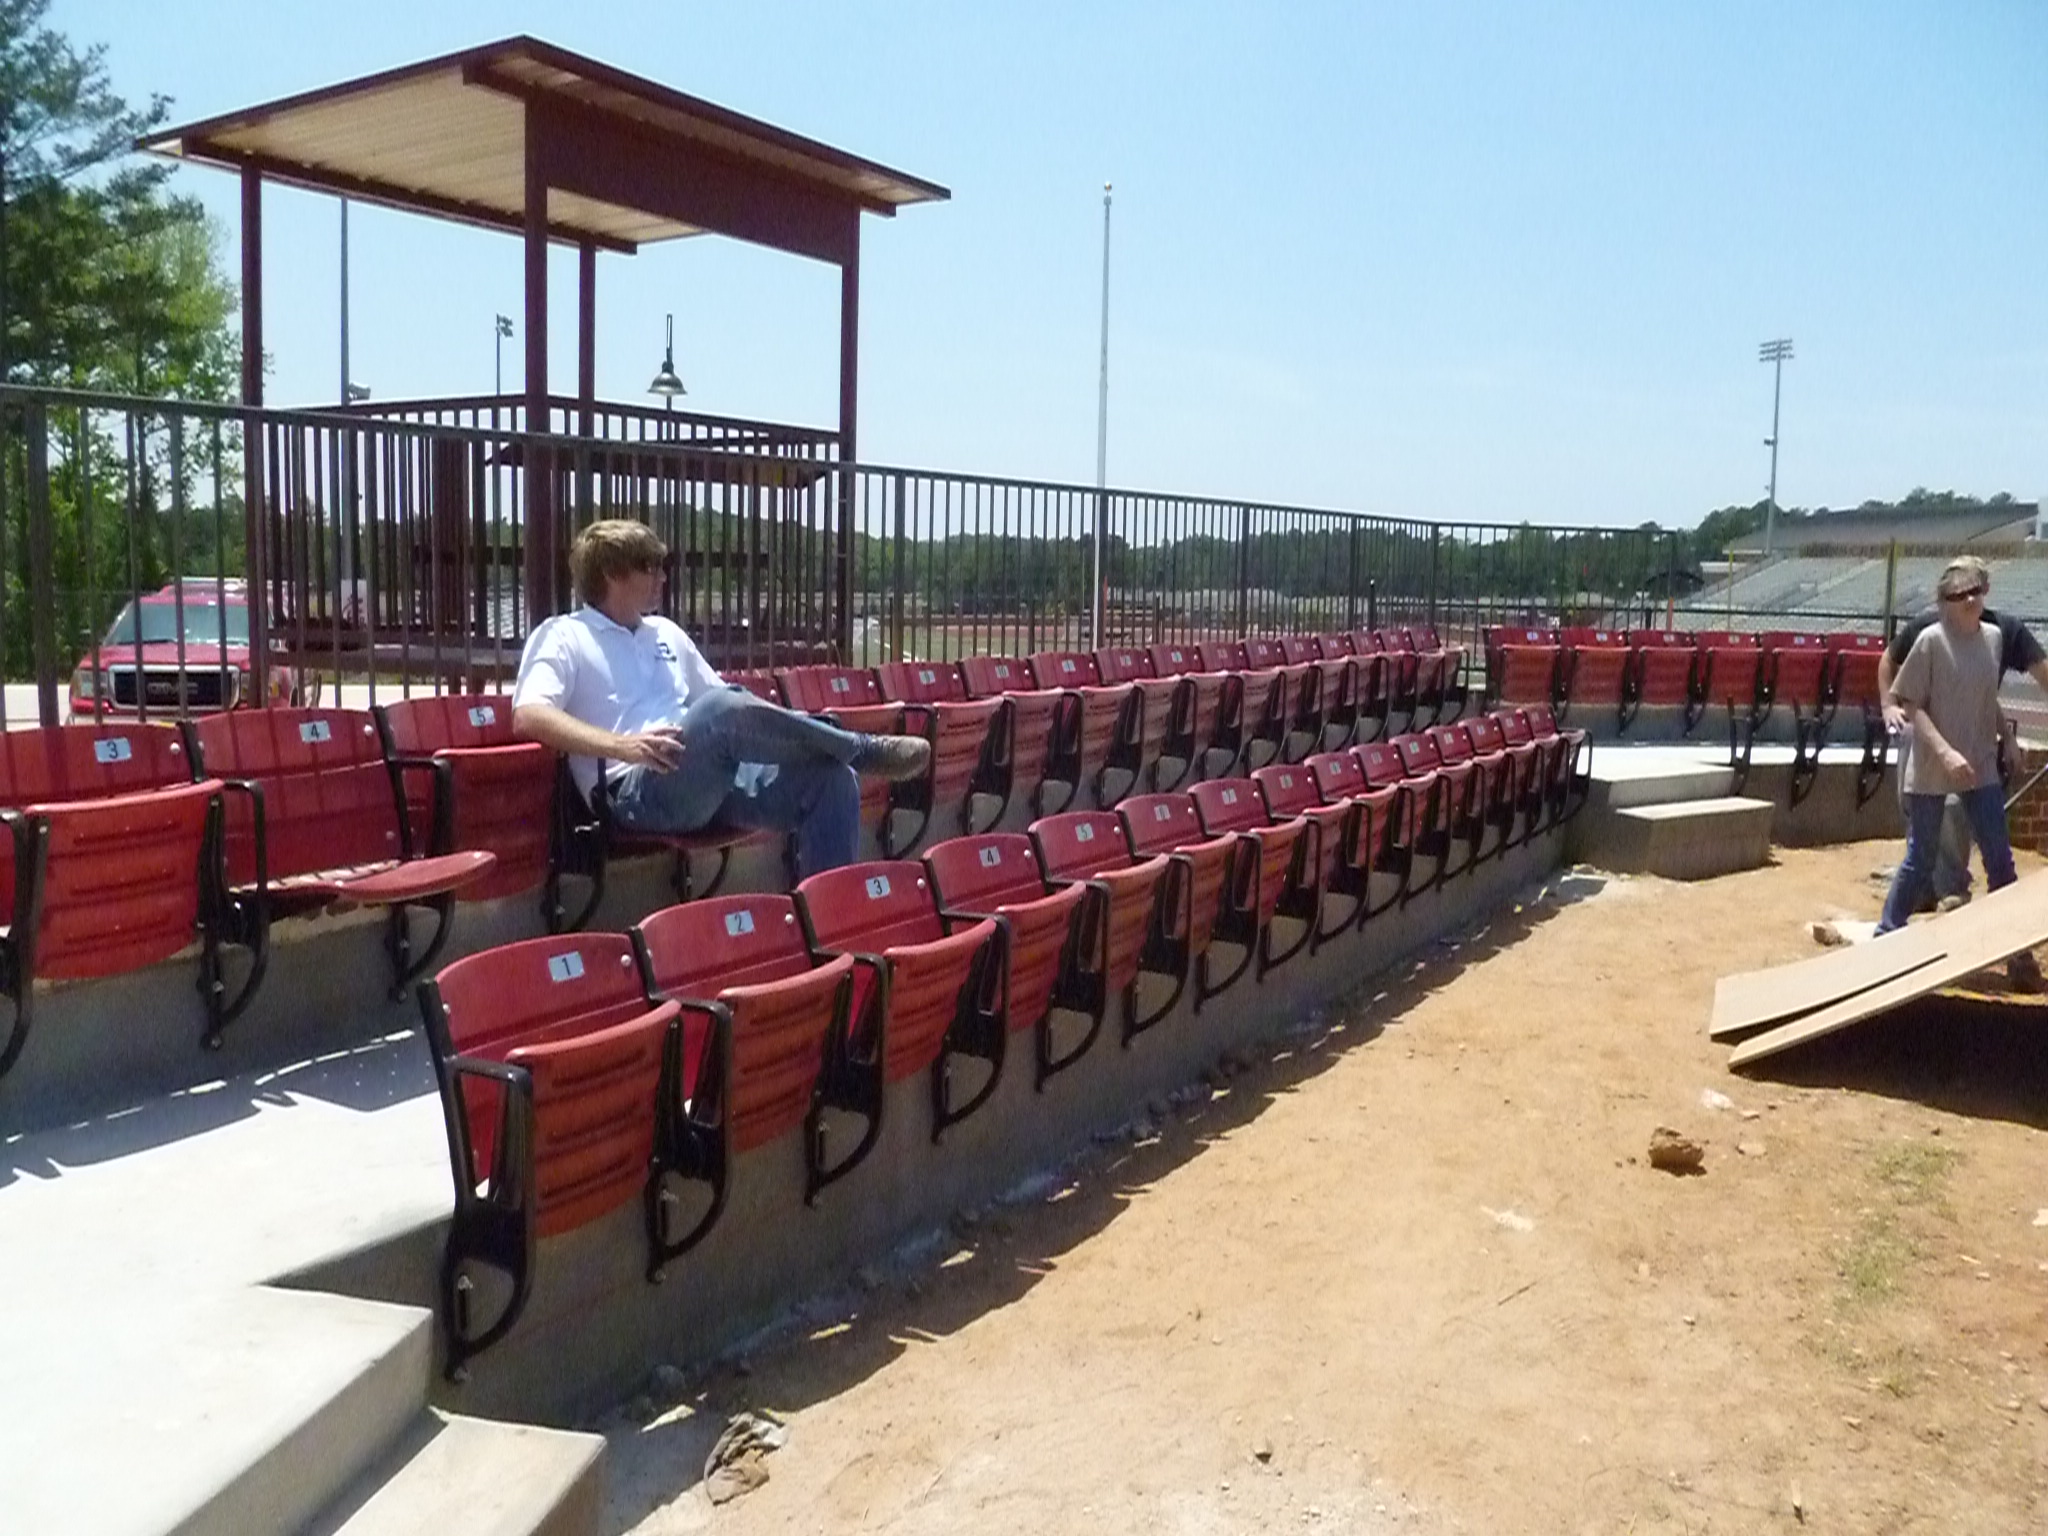 stadiumseating.net: Pictures and Customer List